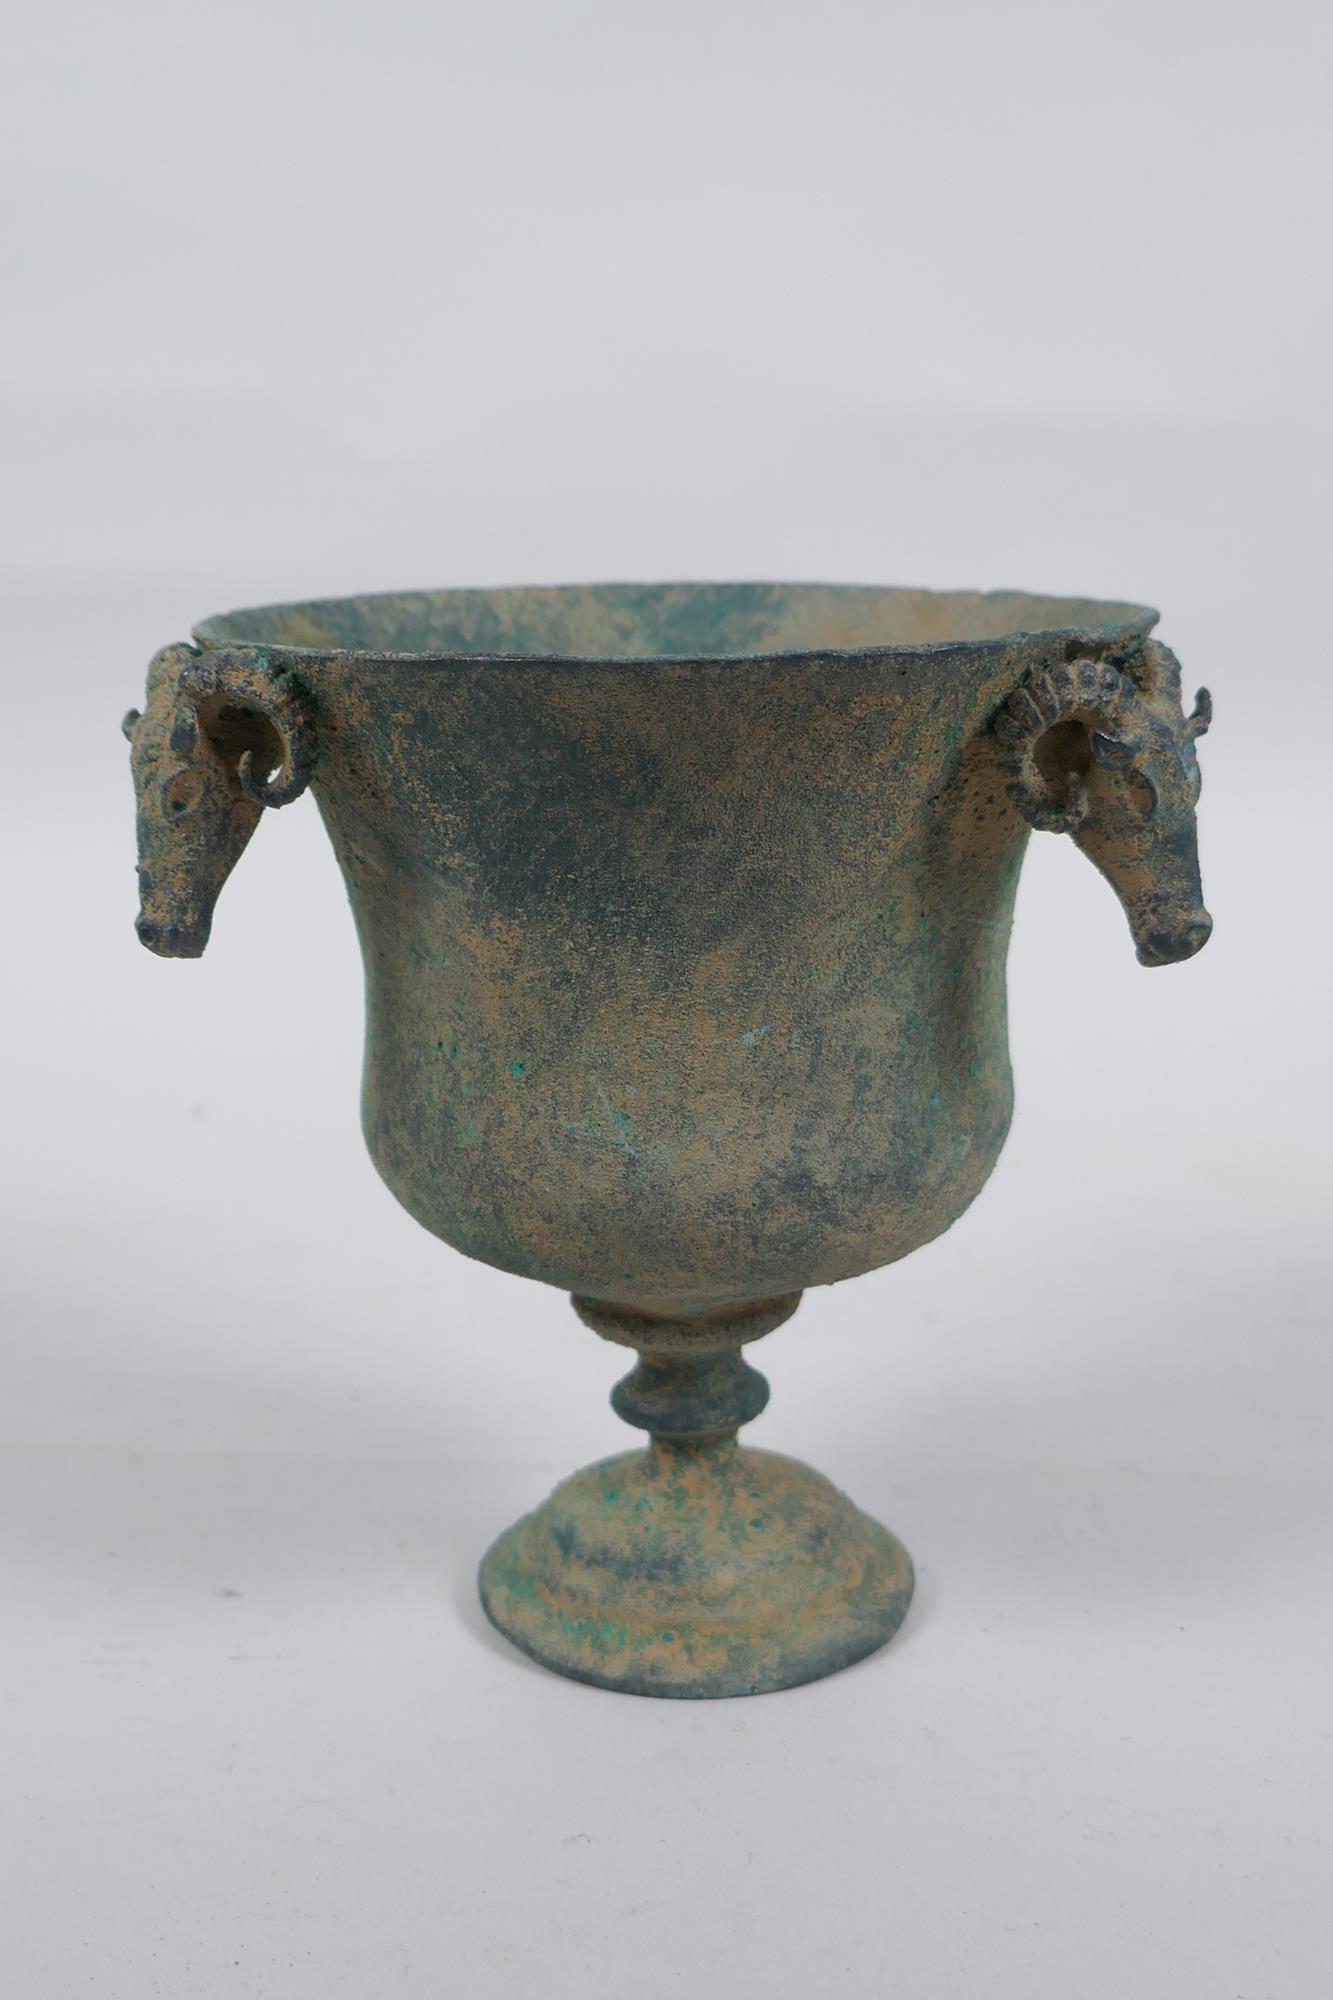 An antique metal goblet with rams head mounts, and green patina, 12cm high - Image 2 of 5